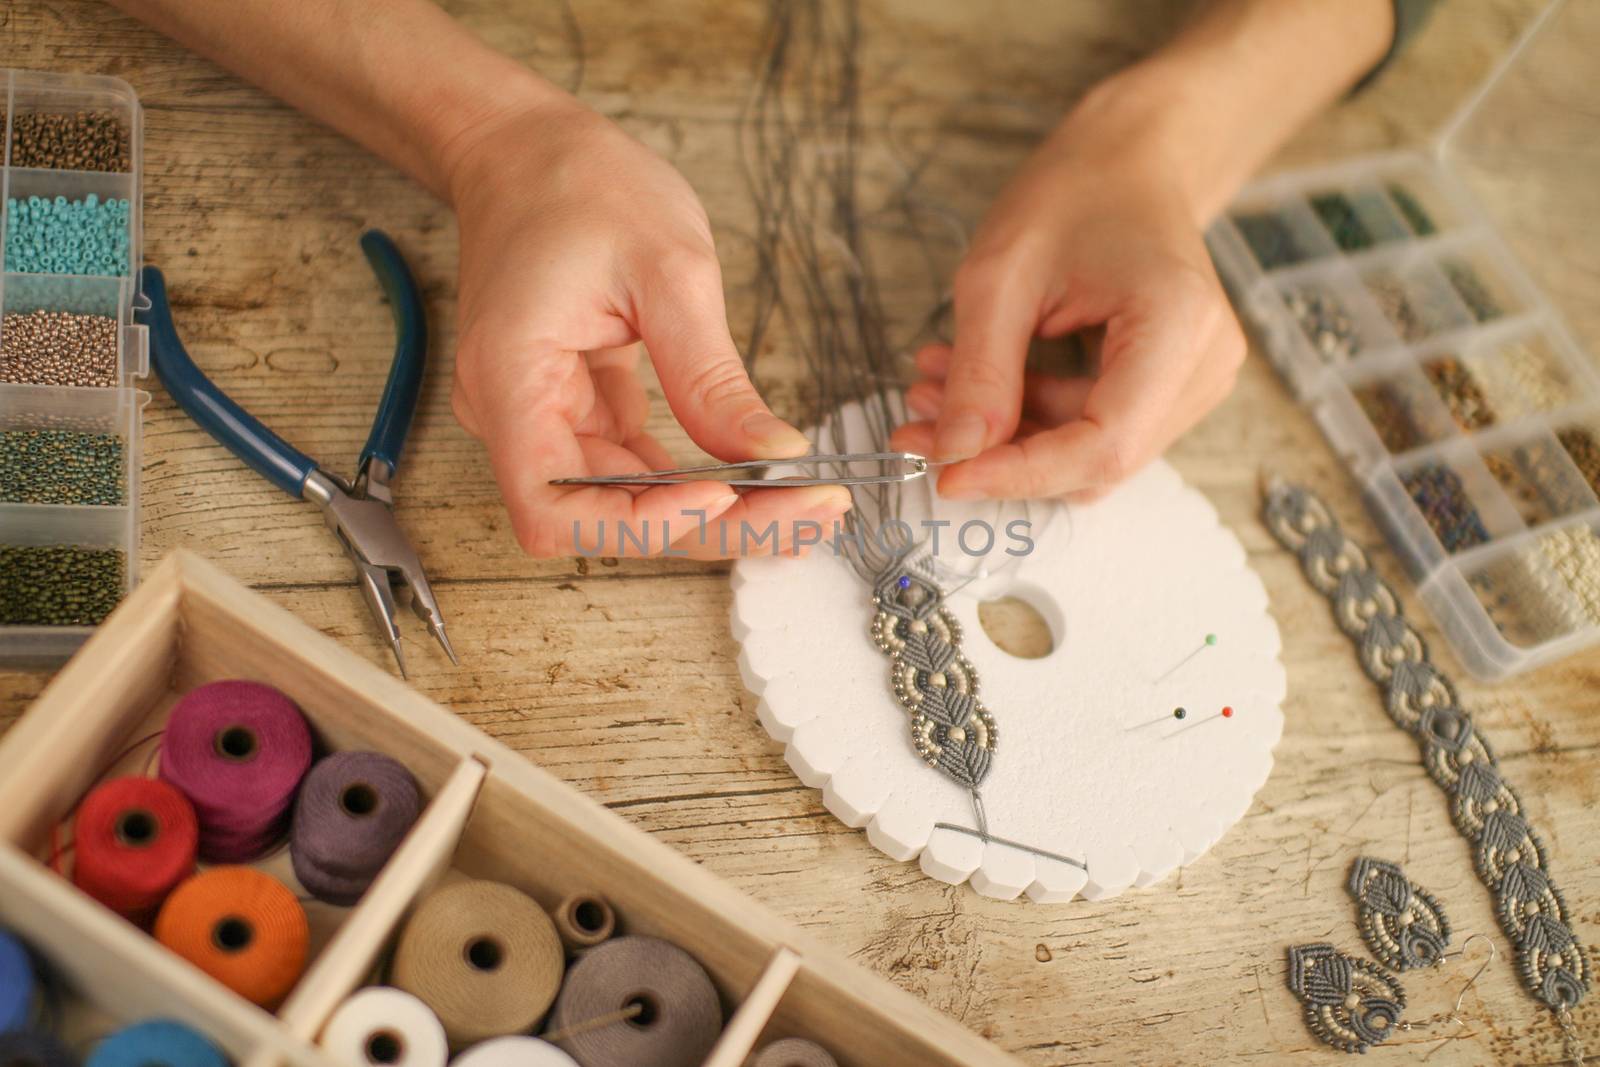 Close up of female hands making a macramé bracelet with kumihimo on a wooden table with tools, spools of thread, natural stones and colored beads